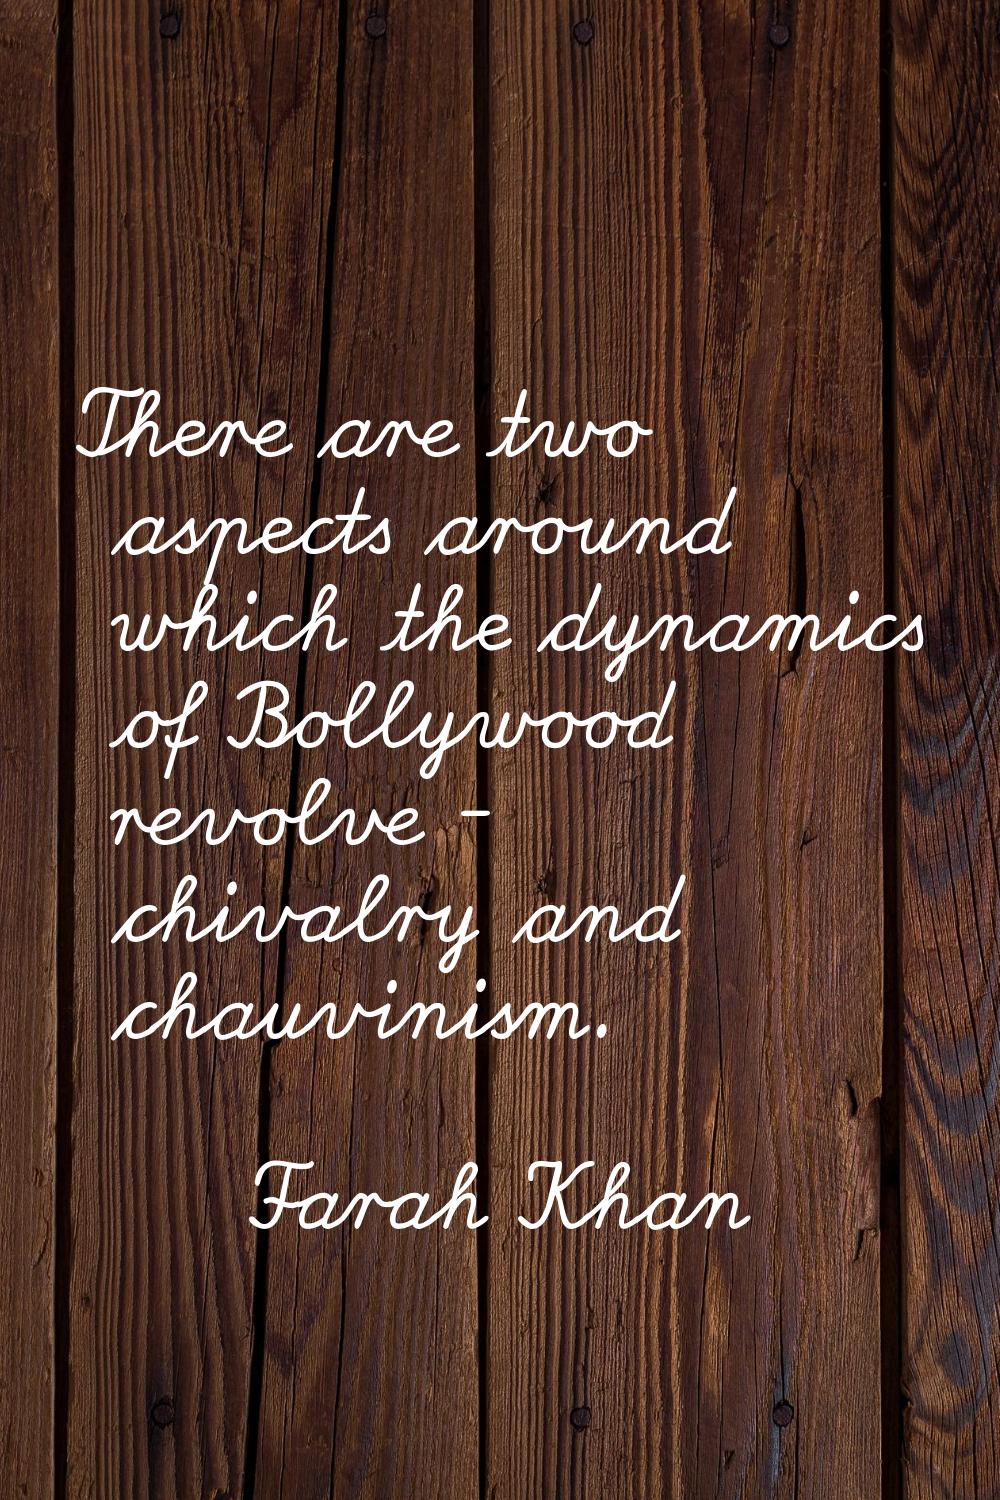 There are two aspects around which the dynamics of Bollywood revolve - chivalry and chauvinism.